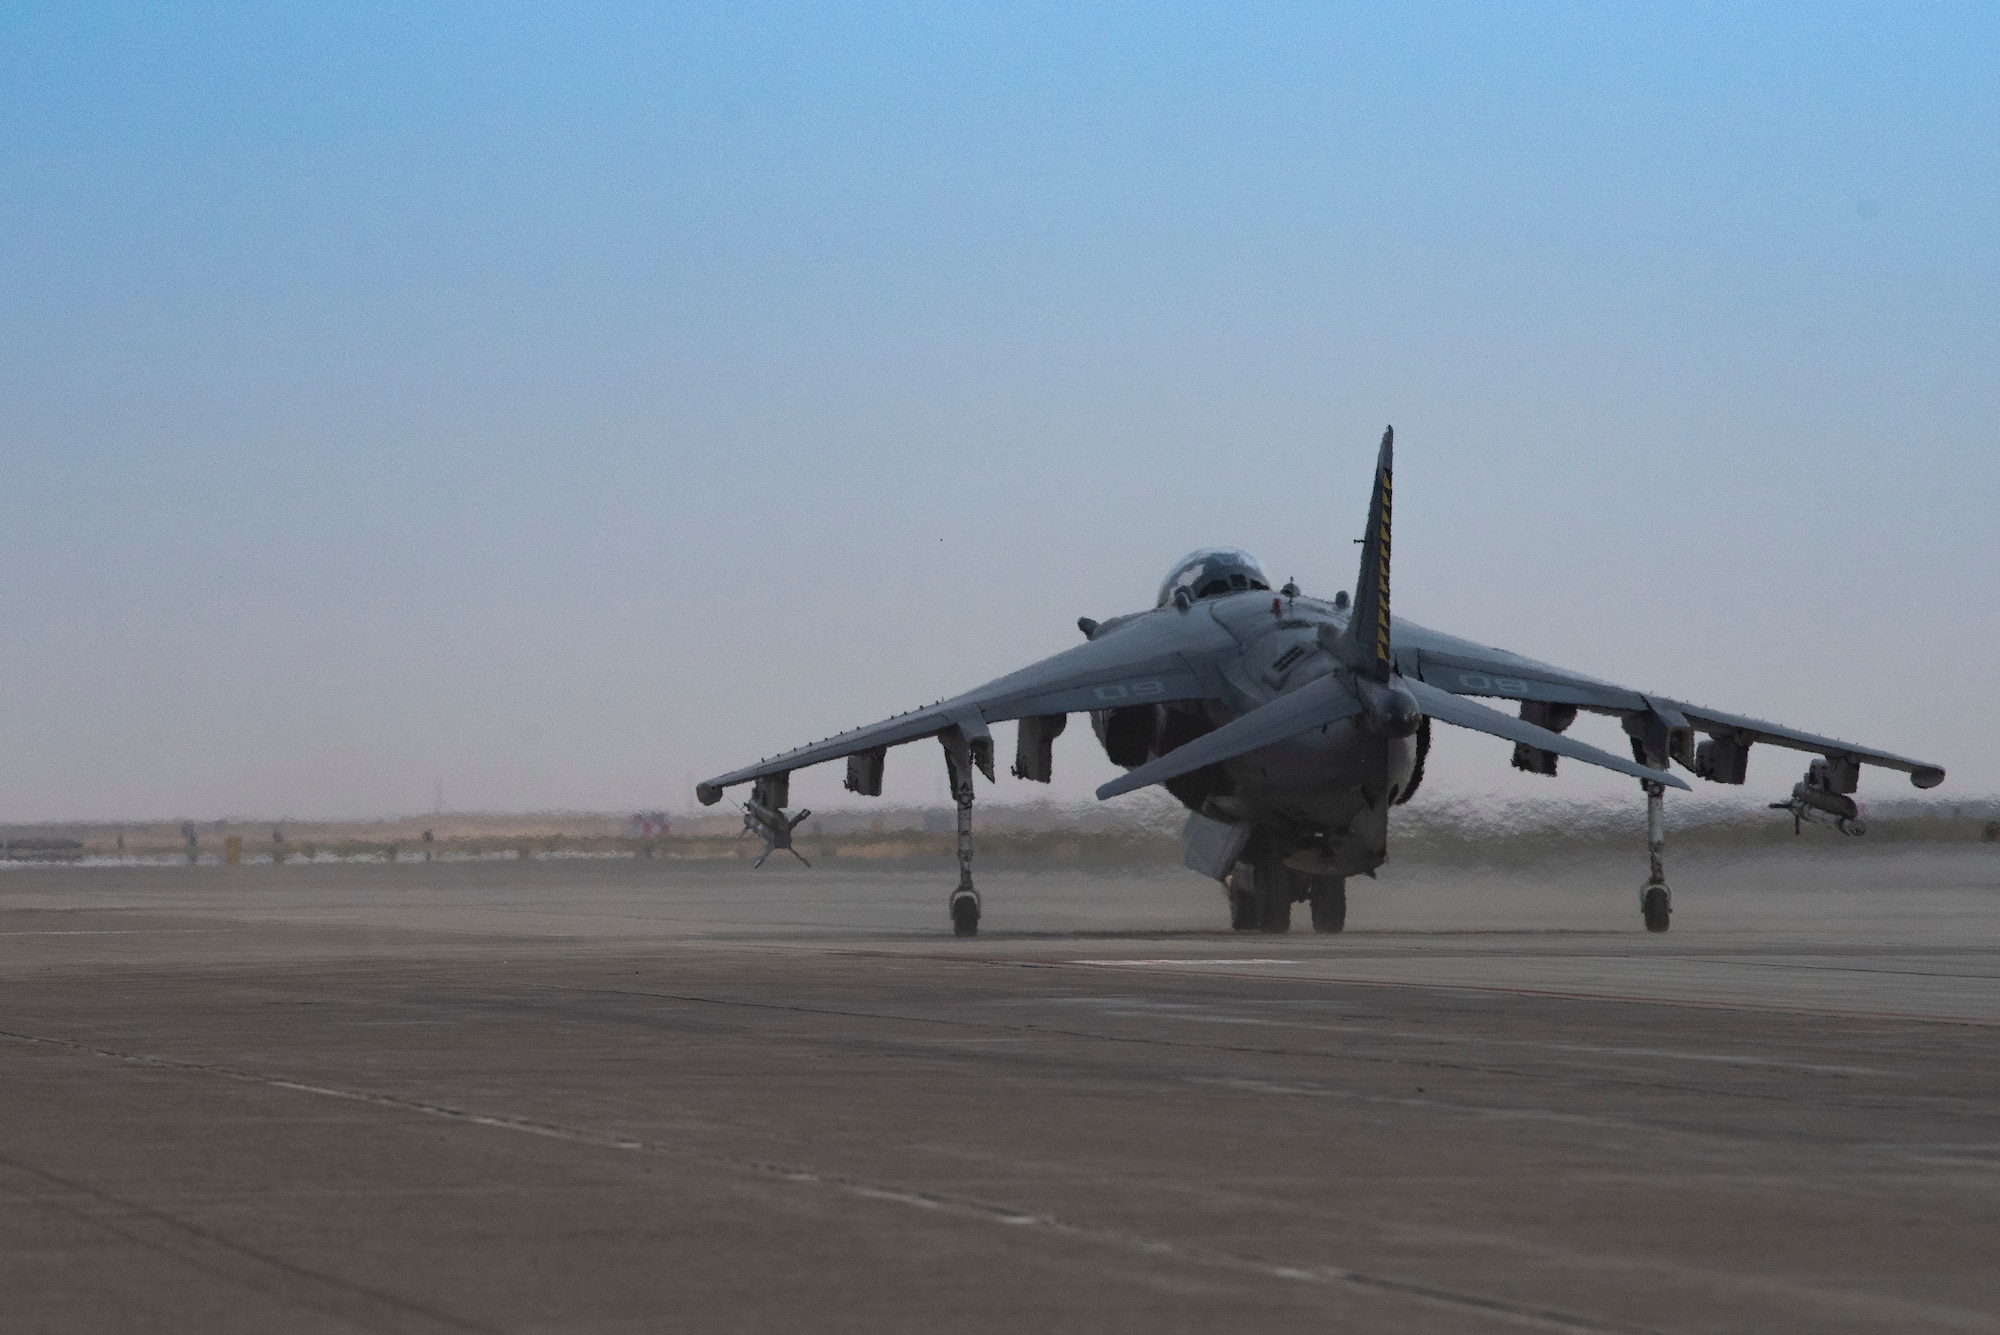 An AV-8B II Harrier from the Marine Attack Squadron 542, taxis down the flightline for exercise Mountain Tiger, at Mountain Home Air Force Base, Idaho, Oct. 8, 2020. VMA 542 and Marine Wing Support Squadron 271 worked closely with 366th Logistics Readiness Squadron fuels flight and provided aviation fuel, heavy equipment and utilities support for exercise Mountain Tiger. (U.S Air Force photo by Airman 1st Class Natalie Rubenak)